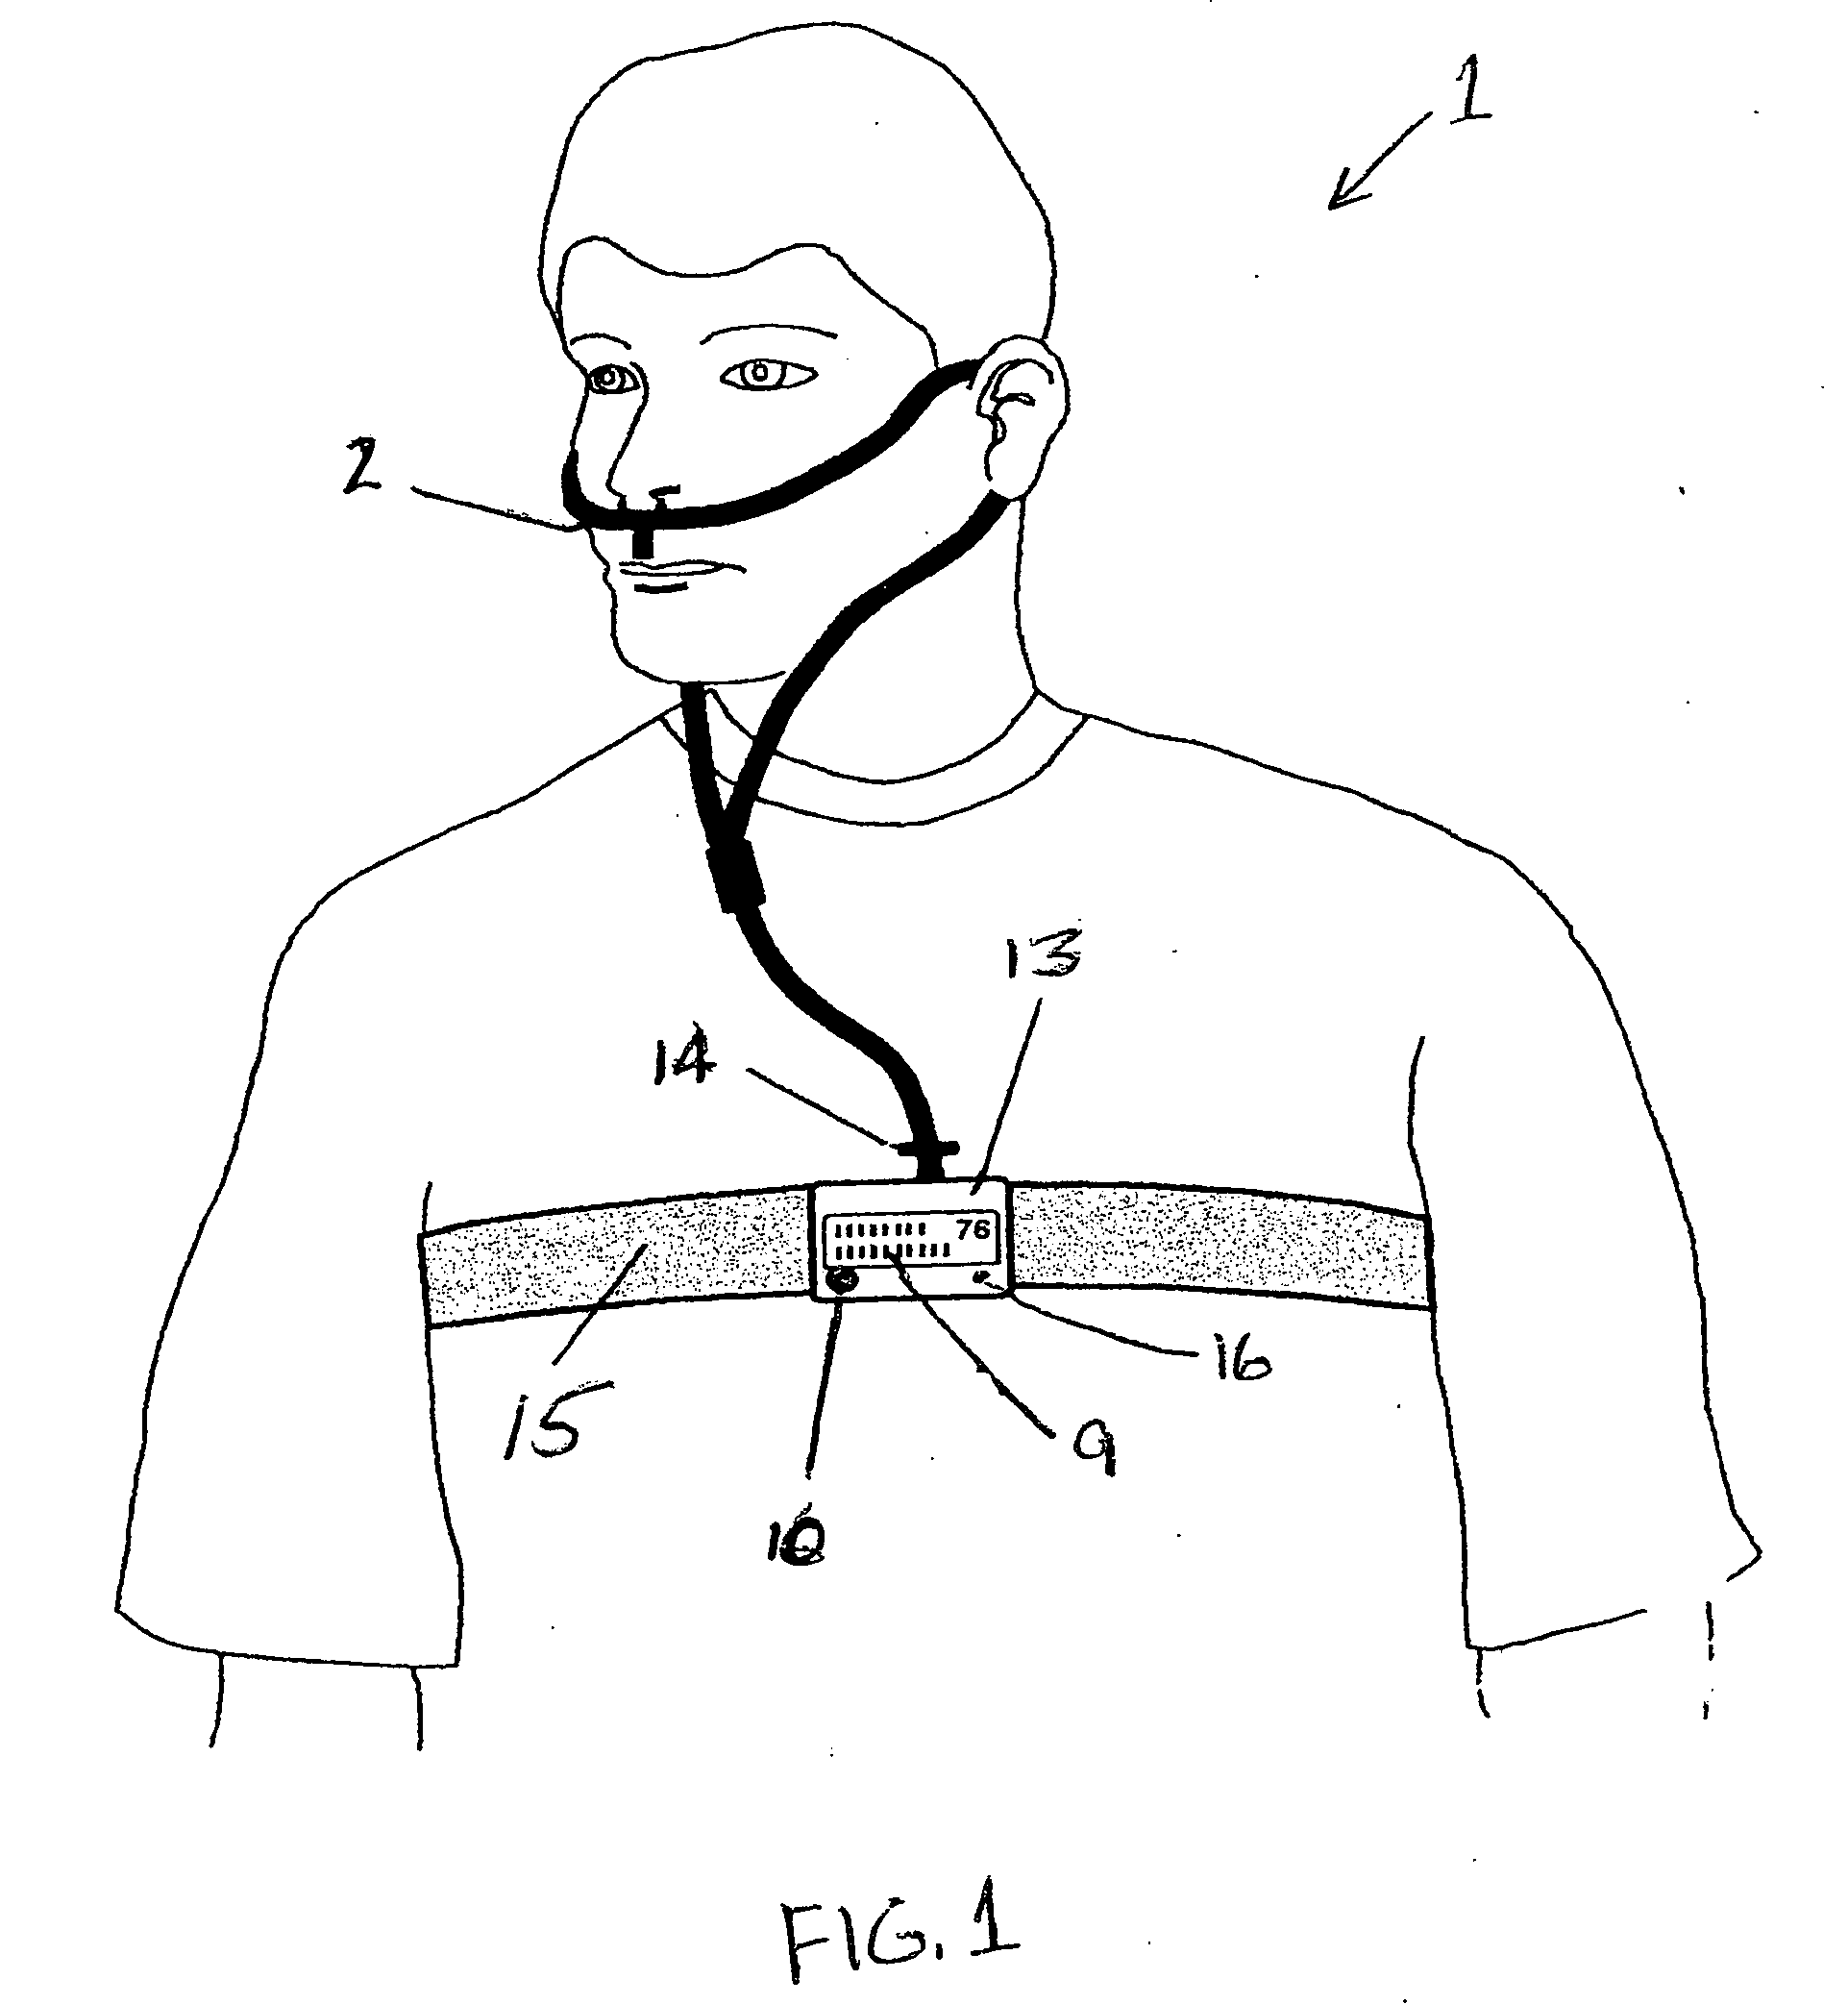 Real-time snoring assessment apparatus and method